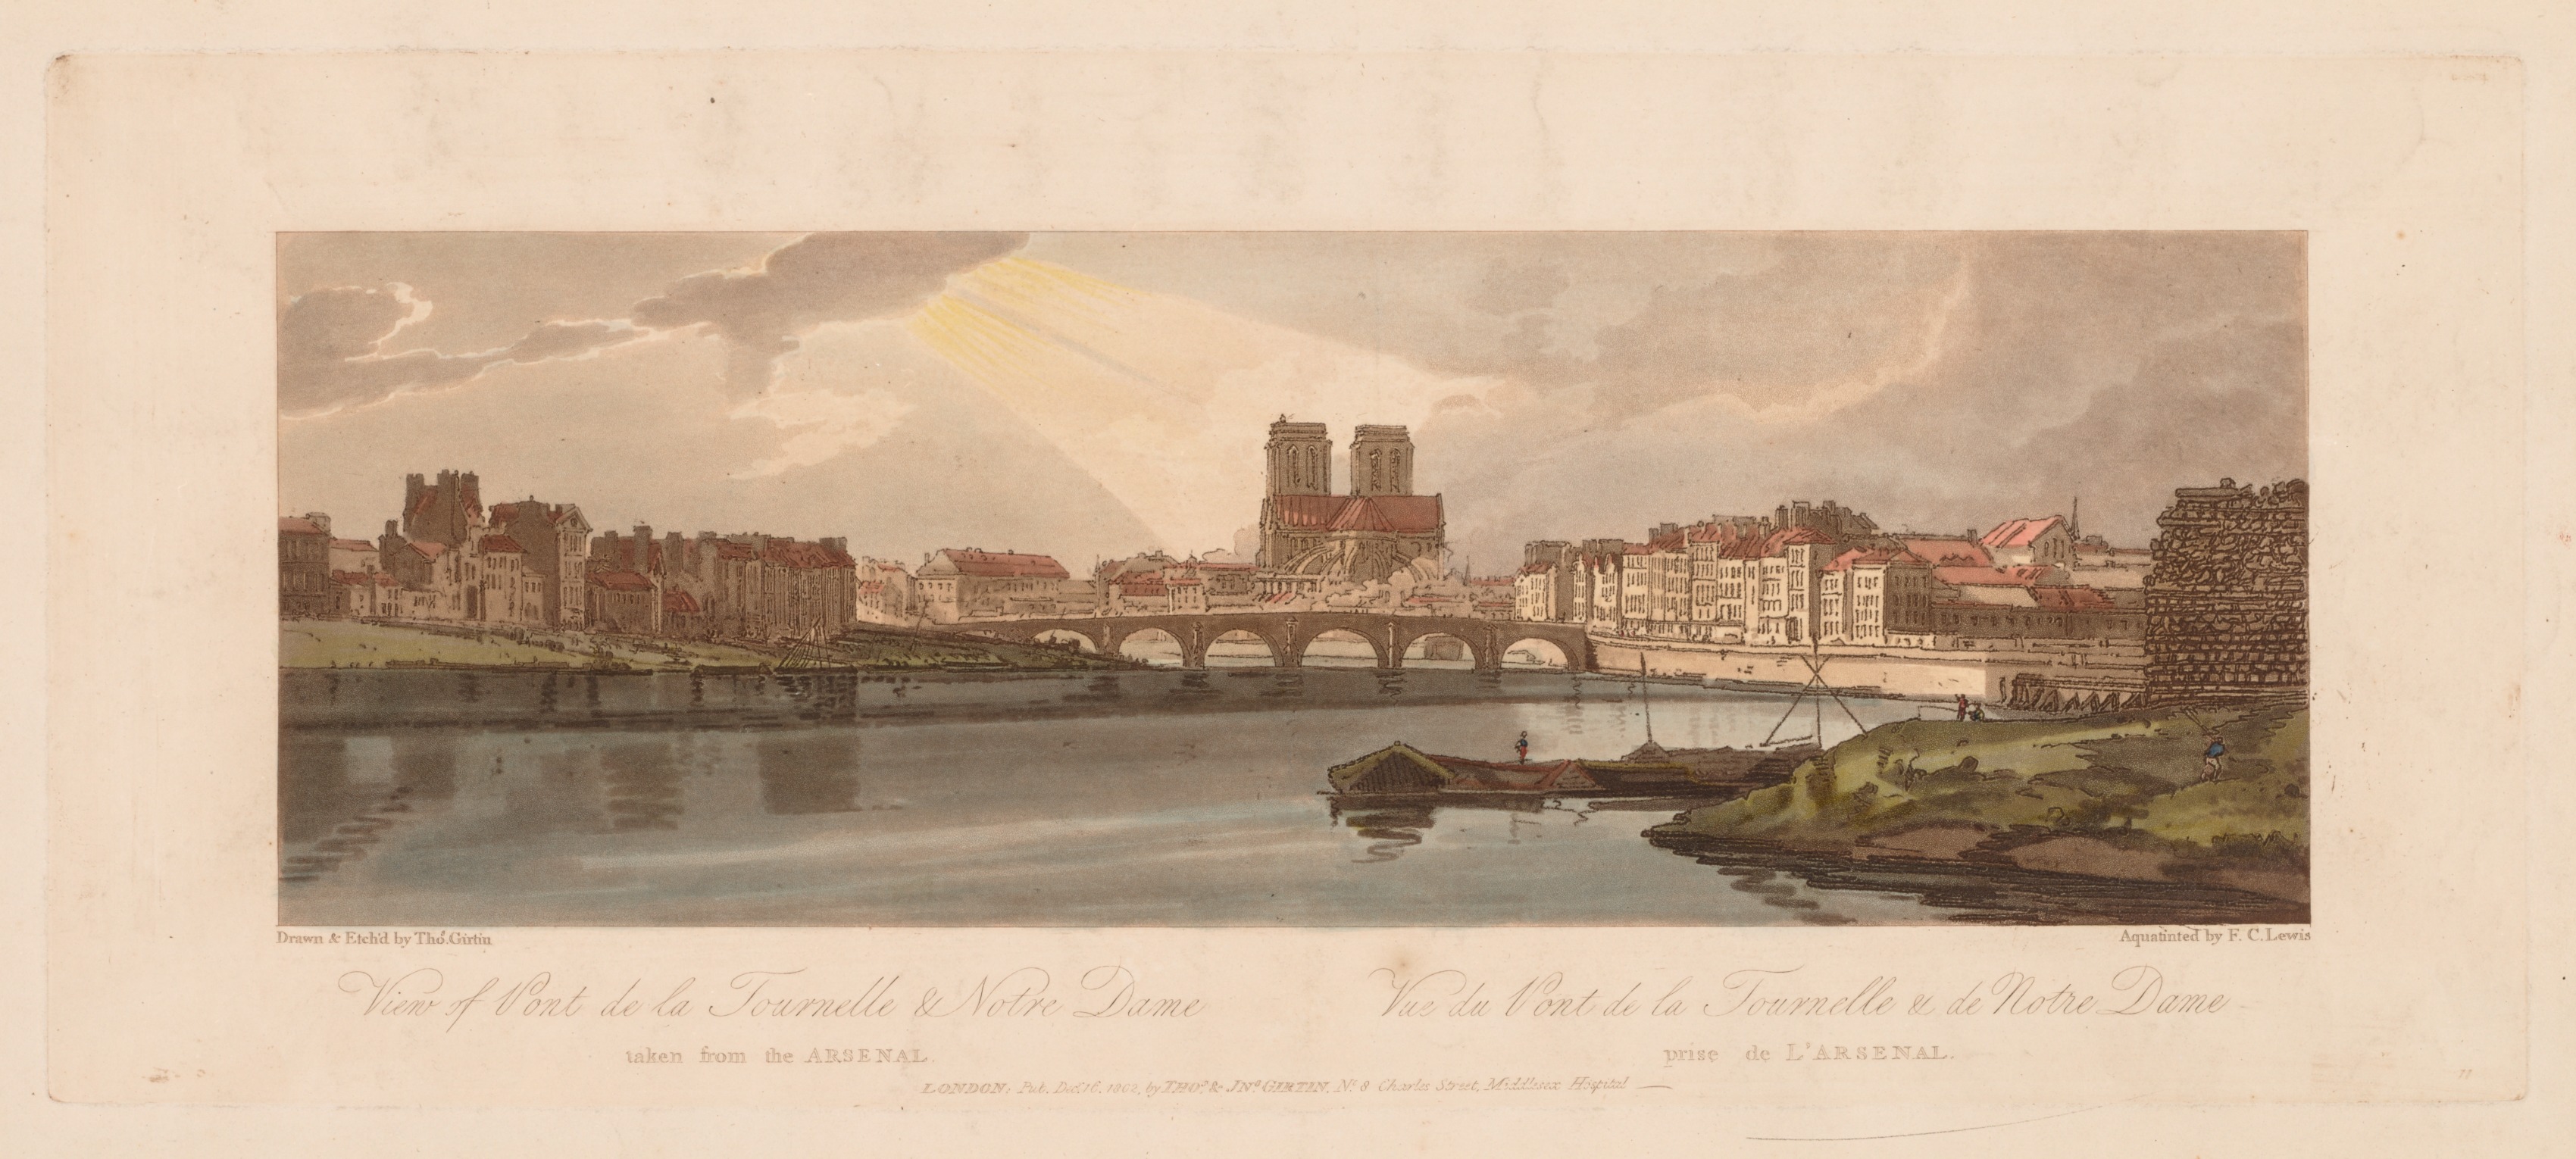 A Selection of Twenty of the Most Picturesque Views in Paris: View of the Pont de la Tournelle & Notre Dame Taken from the Arsenal